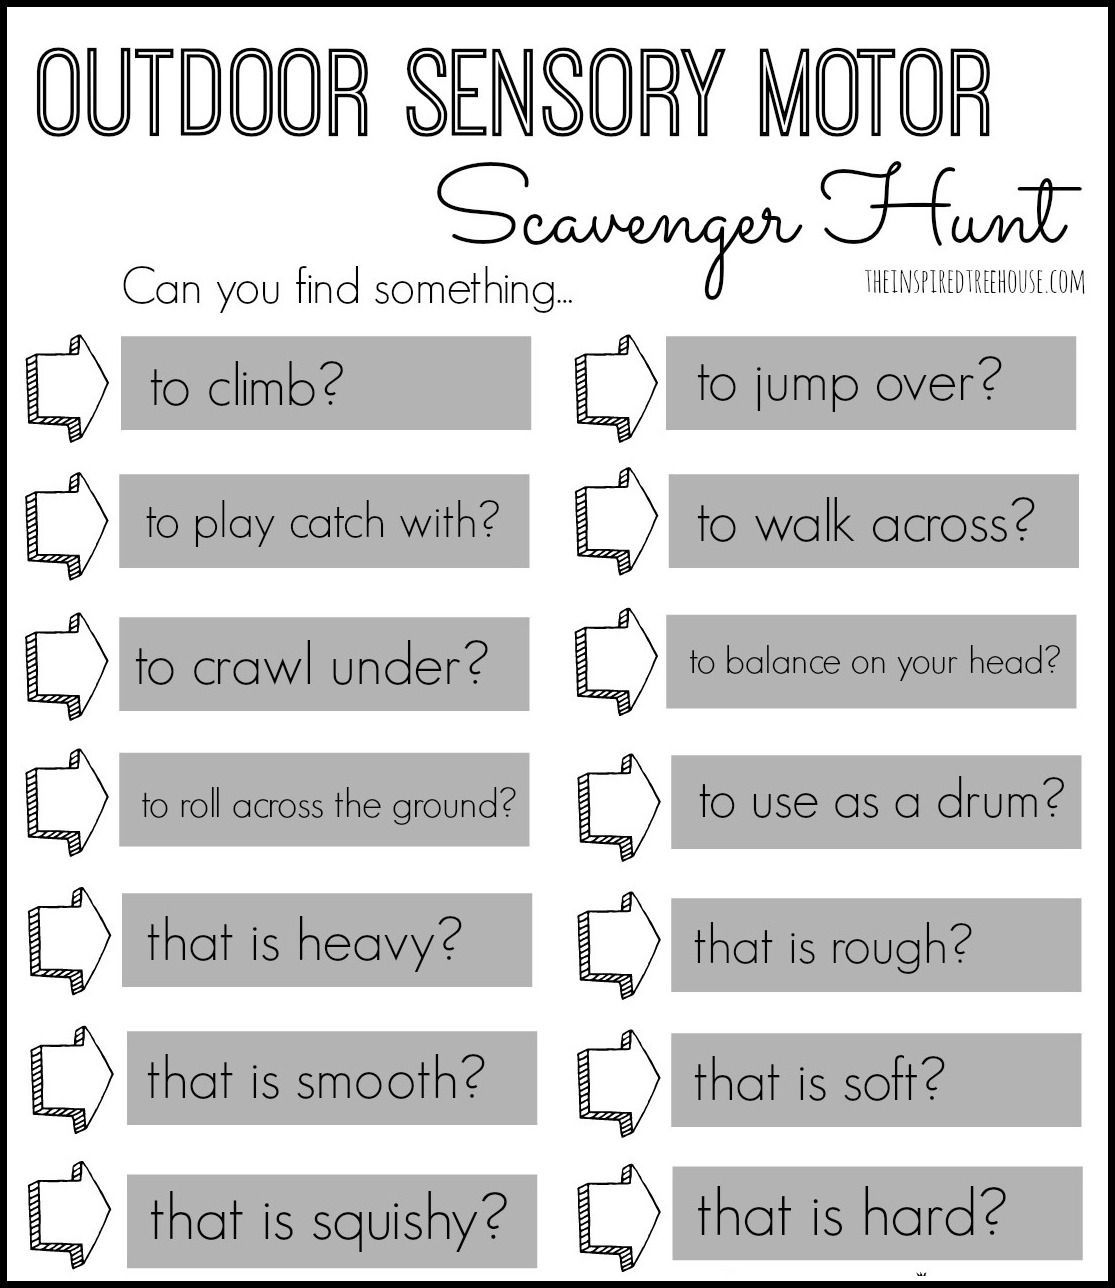 This Outdoor Sensory Motor Scavenger Hunt will get kids moving, touching, noticing, and interacting with the outdoors in a totally different